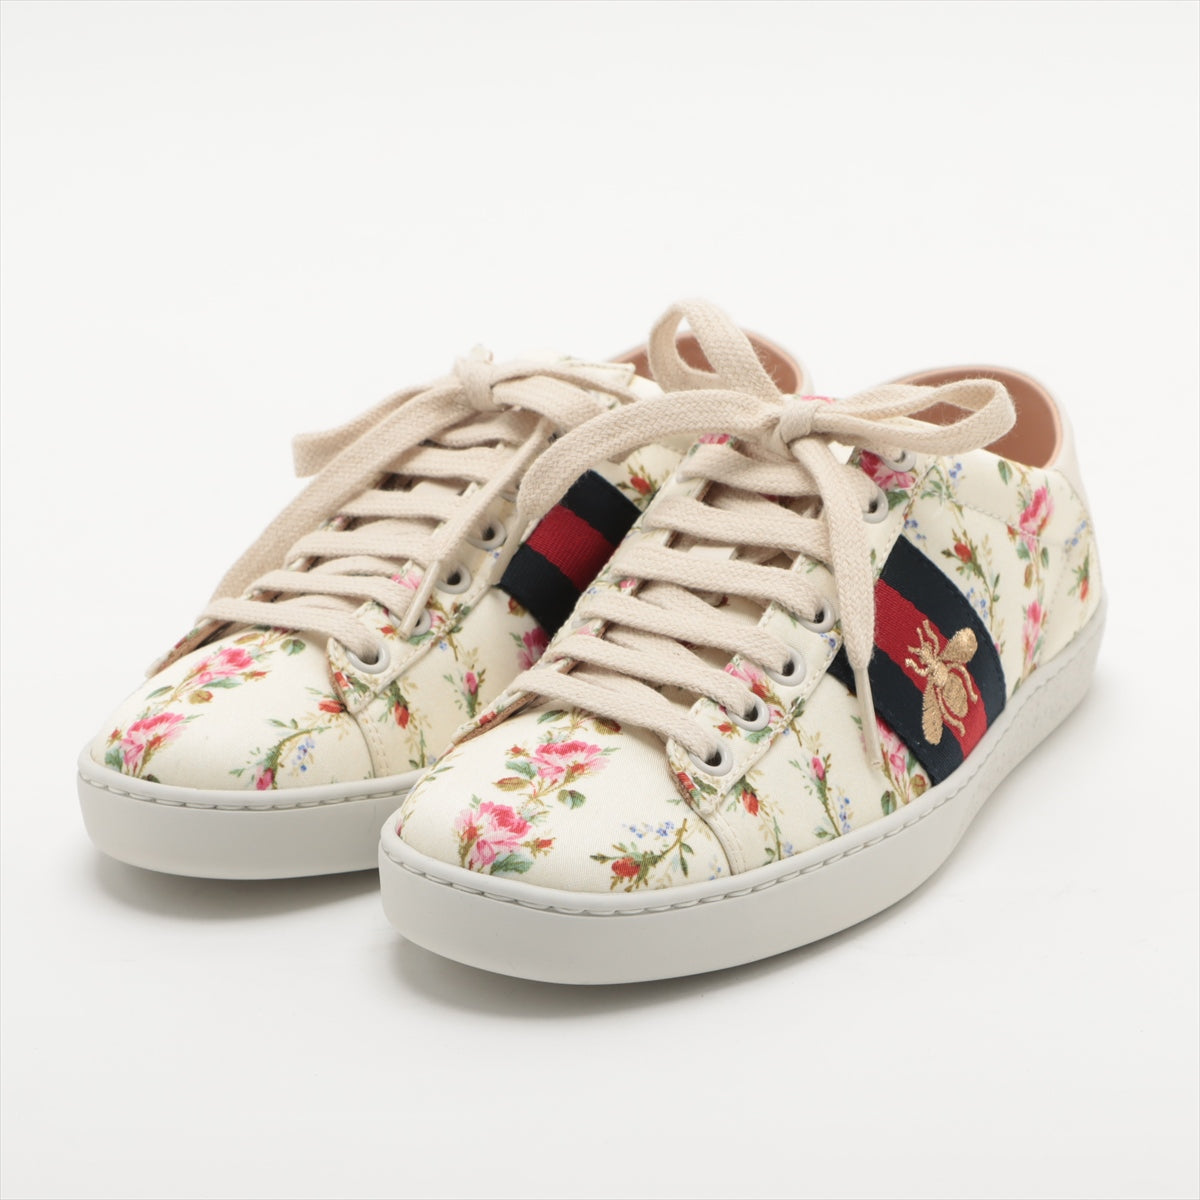 Gucci ACE Leather x fabric Sneakers 34 Ladies' Multicolor 470011 Bee Embroidery floral